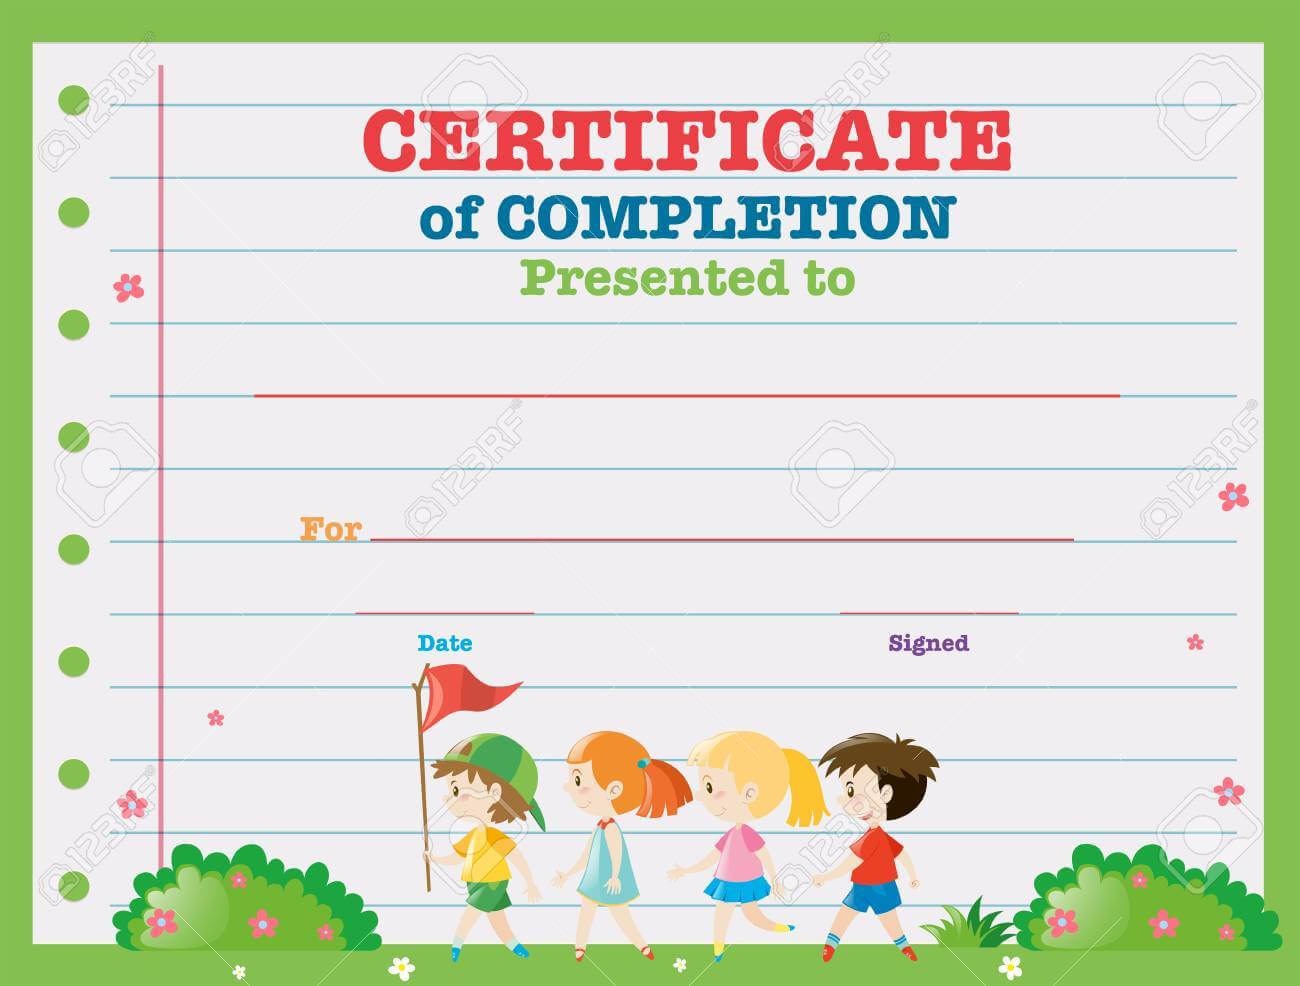 Certificate Template With Kids Walking In The Park Illustration Regarding Free Printable Certificate Templates For Kids